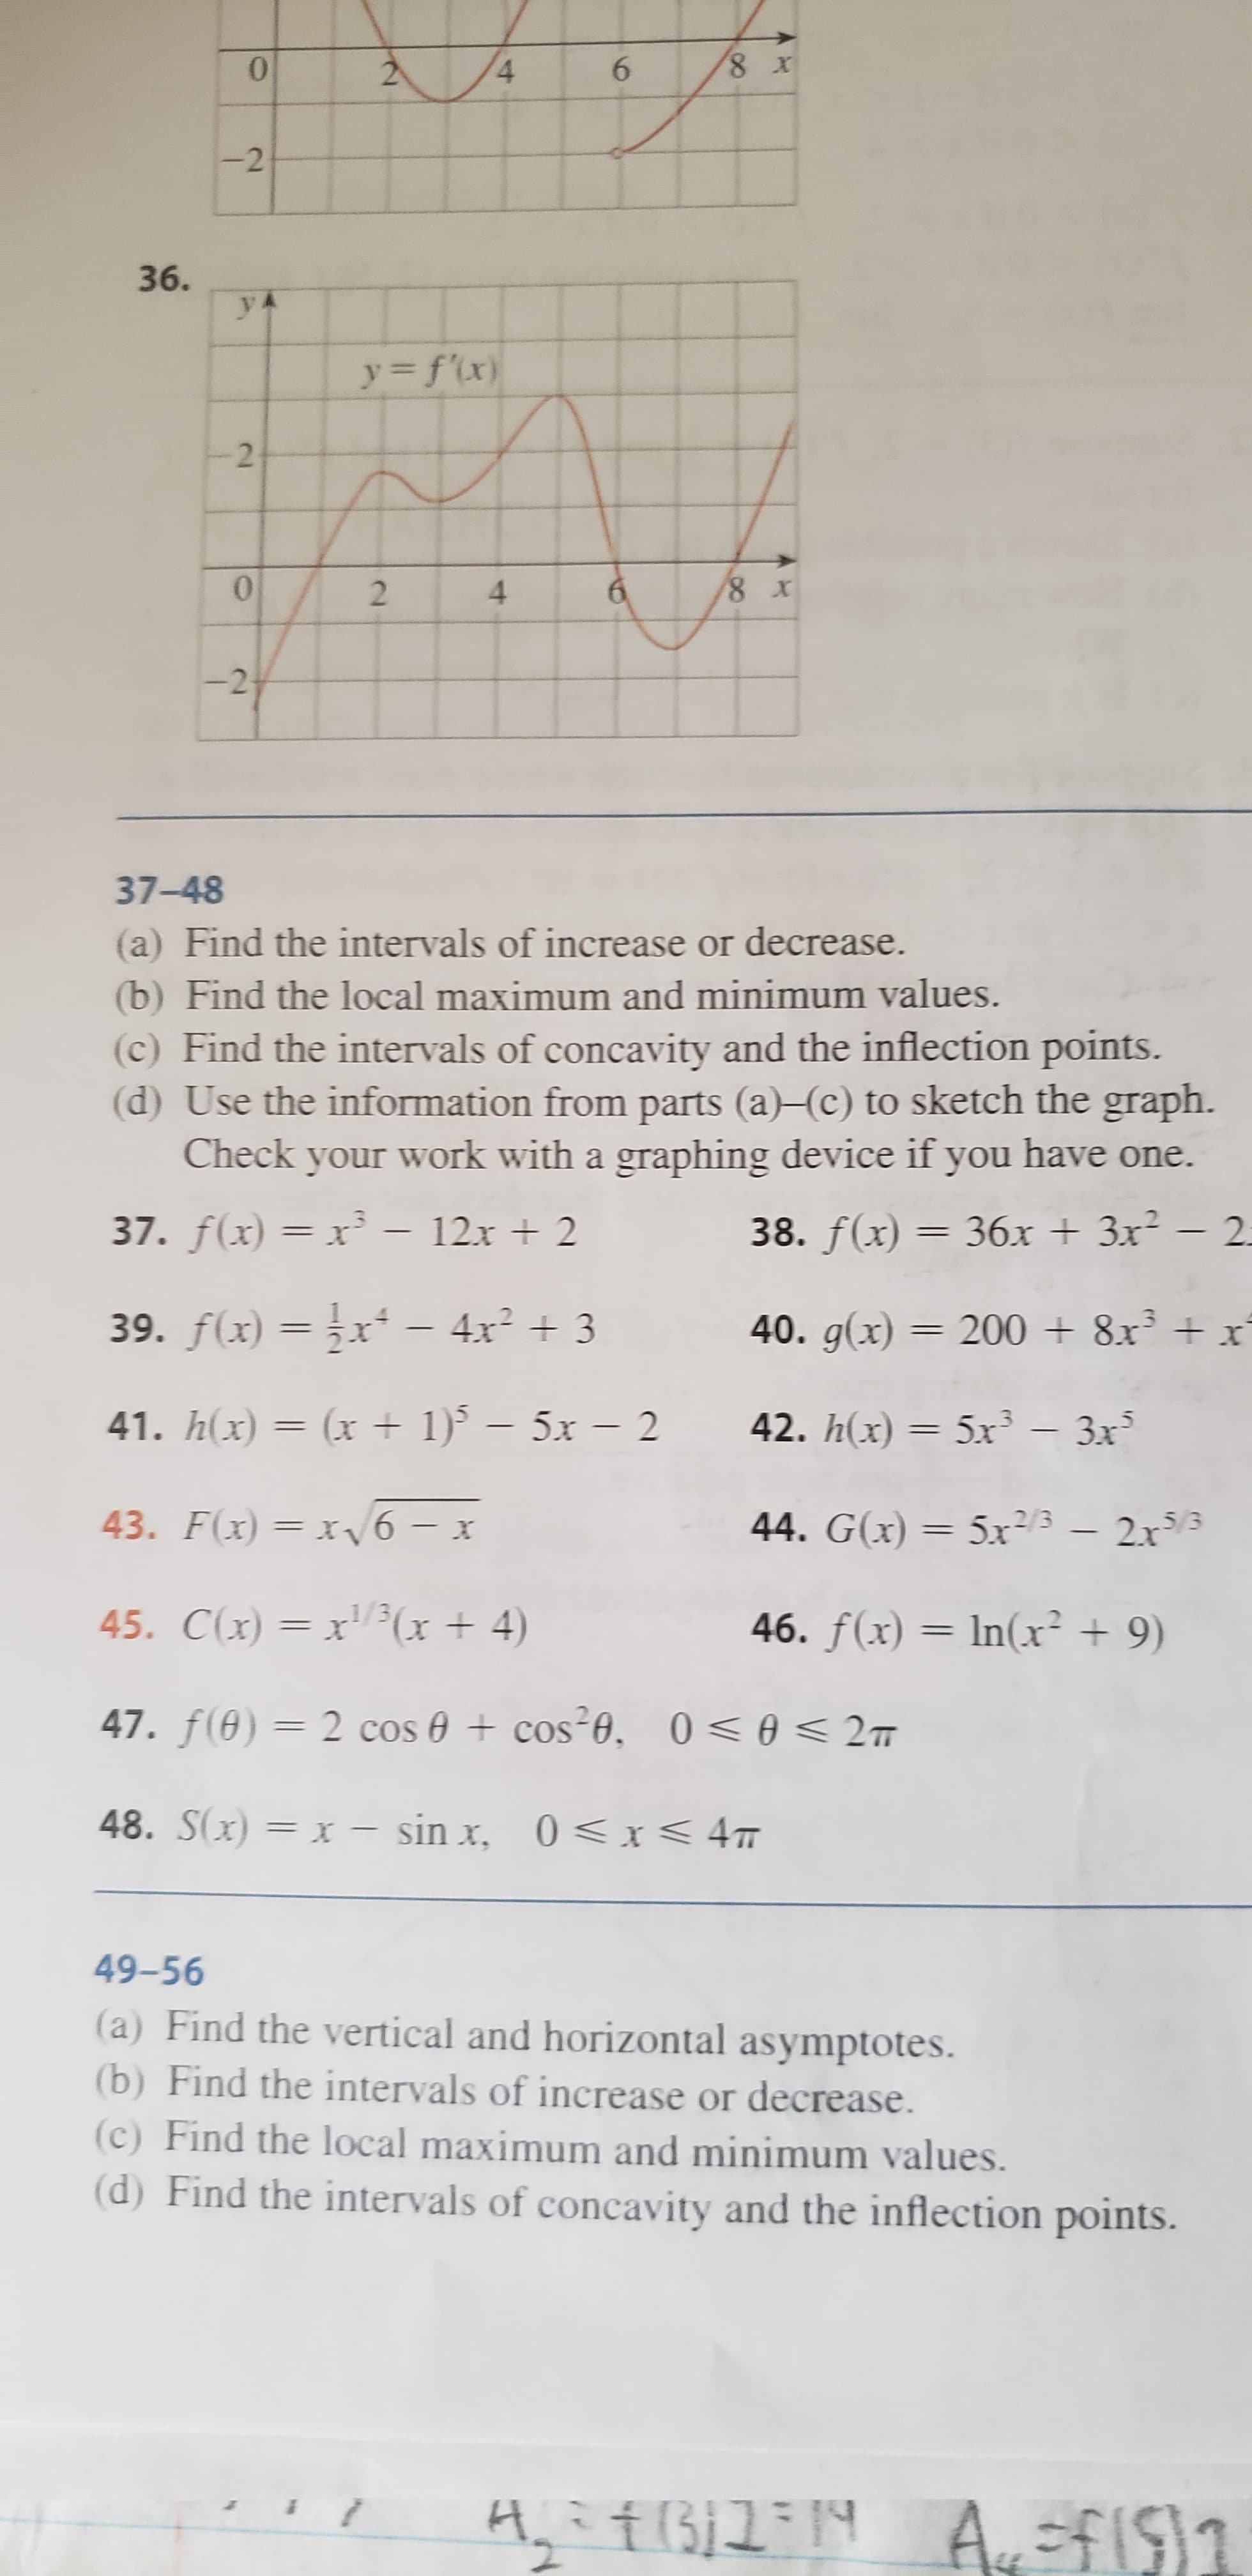 8 x
0
6
2-
4
-2
36.
У
y= f{x)
0
8 X
2
-2
37-48
a) Find the intervals of increase or decrease.
(b) Find the local maximum and minimum values.
(c) Find the intervals of concavity and the inflection points.
(d) Use the information from parts (a)-(c) to sketch the graph.
Check your work with a graphing device if you have one.
37. f(x)= x- 12x+ 2
38. f(x) 36x + 3x2- 2
39. f(x)=x - 4x2 3
40. g(x) = 2008x3+
X
(x1)5x- 2
5x3-3x
41. hx)
42. h(x)
=
43. F(x)= x6- x
44. G(x)= 5x2/3 2x5
2r3
45. C(x) = x13x 4)
46. f(x) In(x 9)
X
47. f(0) 2 cos cos20, 0 A2m
48. S(x)= x - sin x, 0 <x< 4m
49-56
(a) Find the vertical and horizontal asymptotes
(b) Find the intervals of increase or decrease
(c) Find the local maximum and minimum values
(d) Find the intervals of concavity and the inflection points.
ARTB AfIS1
4
CN
